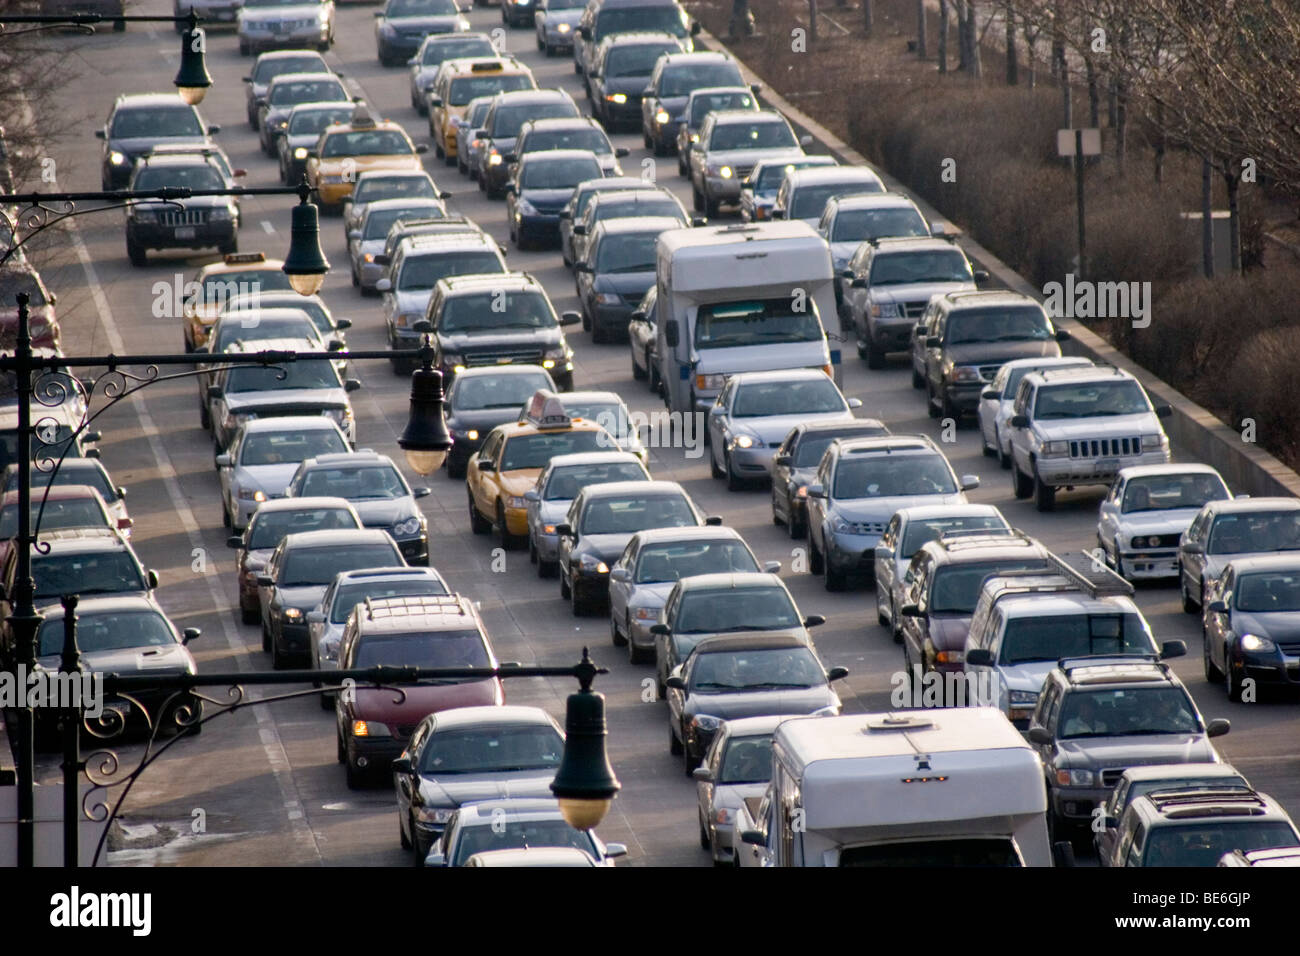 Heavy automobile traffic on a major road. Stock Photo